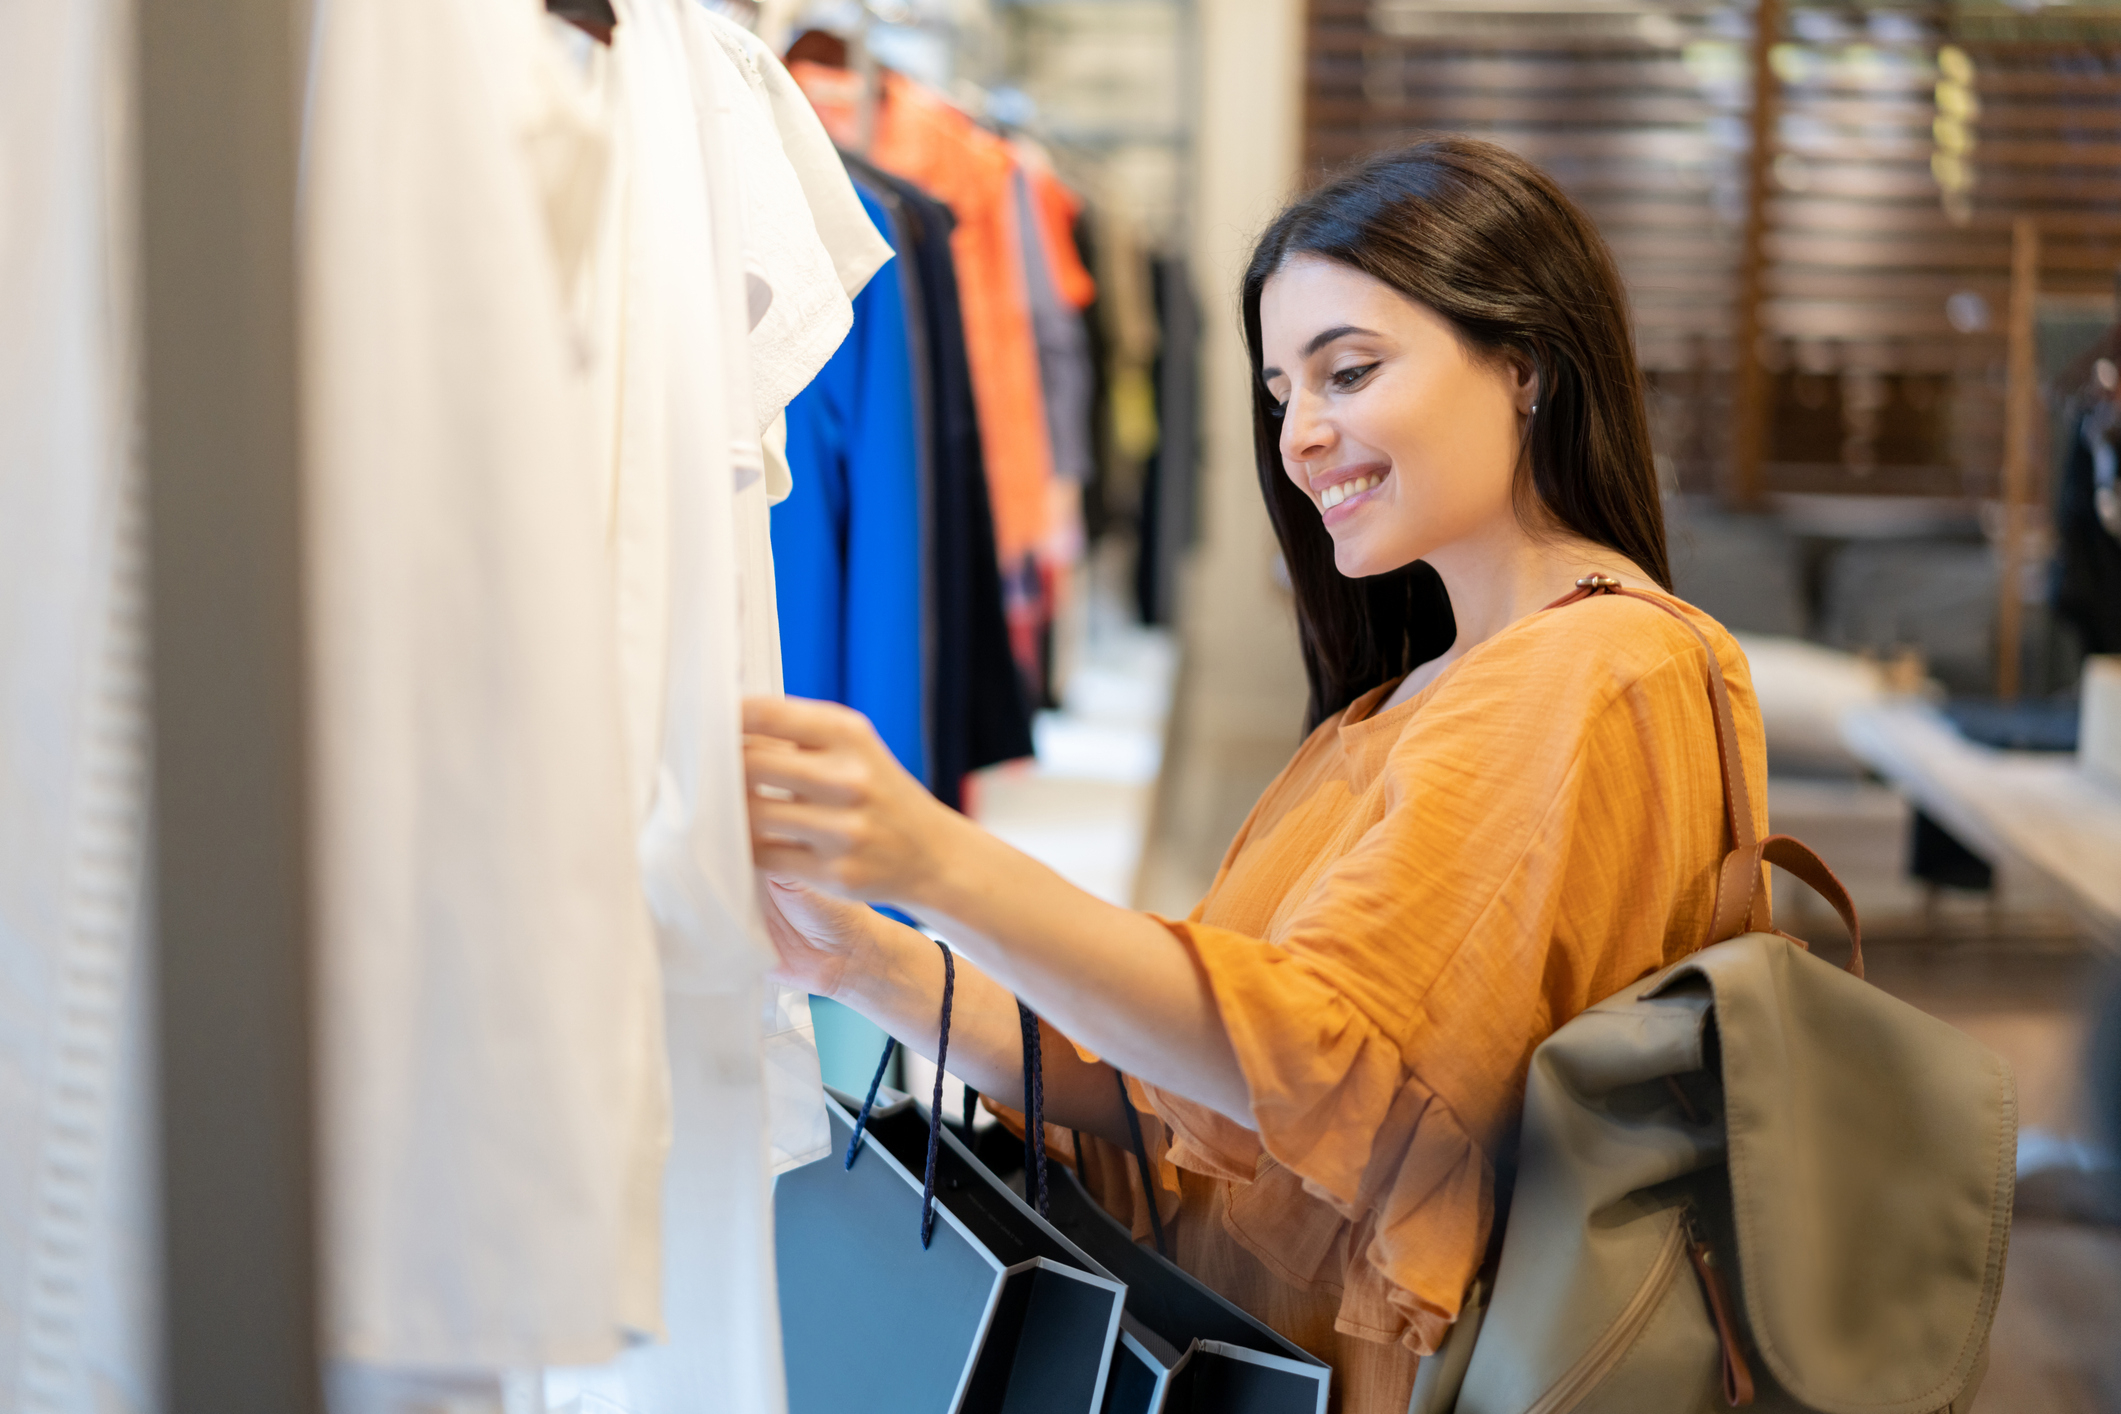 Woman browsing clothing at a store with a backpack, possibly shopping for work attire